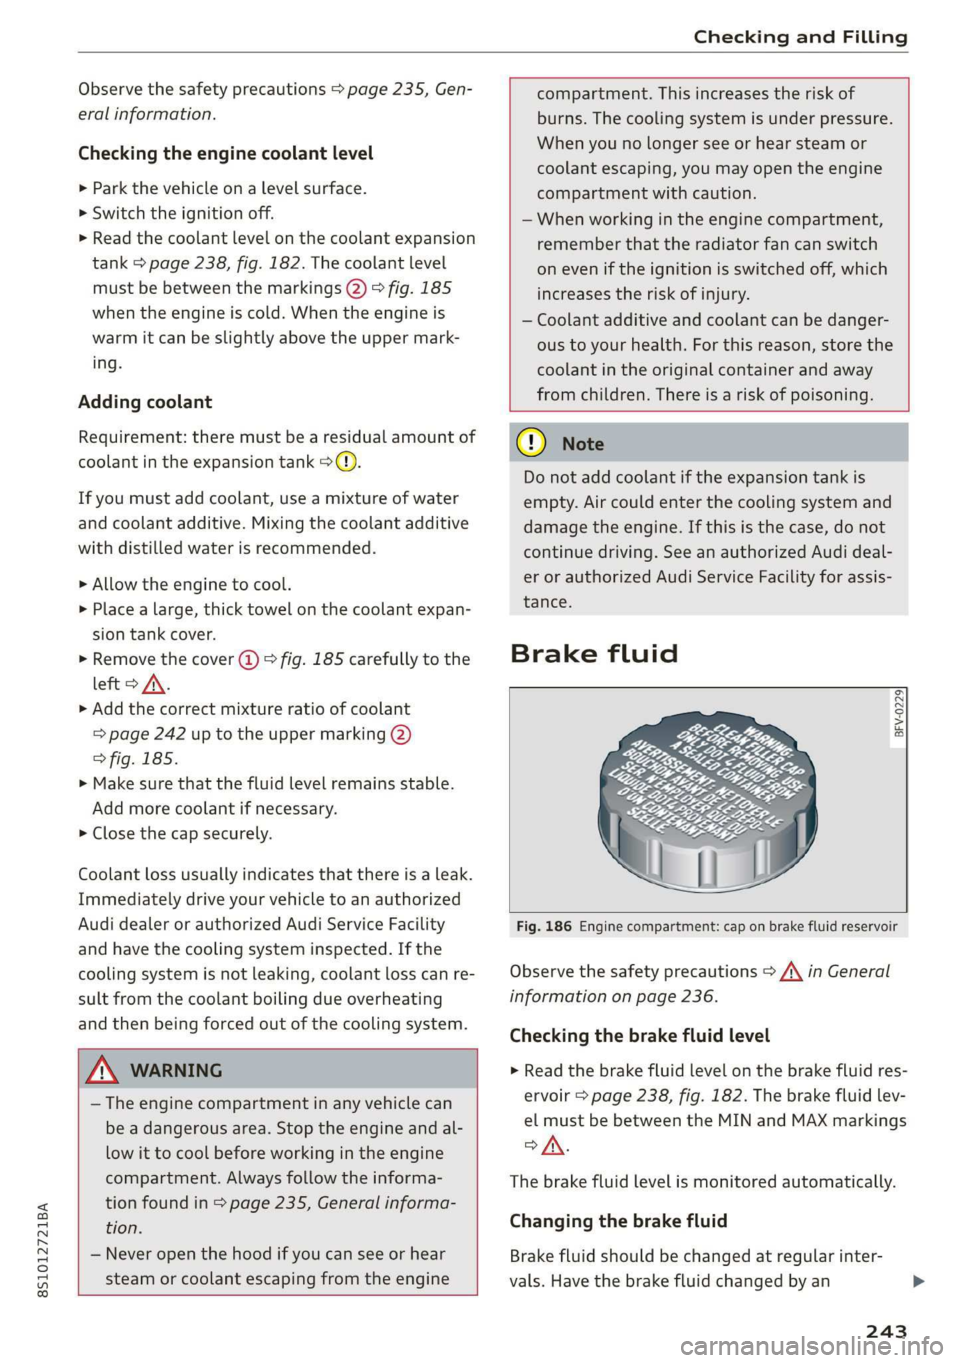 AUDI TT COUPE 2019  Owners Manual 8S1012721BA
CheckingandFilling
 
Observethesafetyprecautions>page235,Gen-
eralinformation.
Checkingtheenginecoolantlevel
»Parkthevehicleonalevelsurface.
>Switchtheignitionoff.
>Readthecoolantlevelont